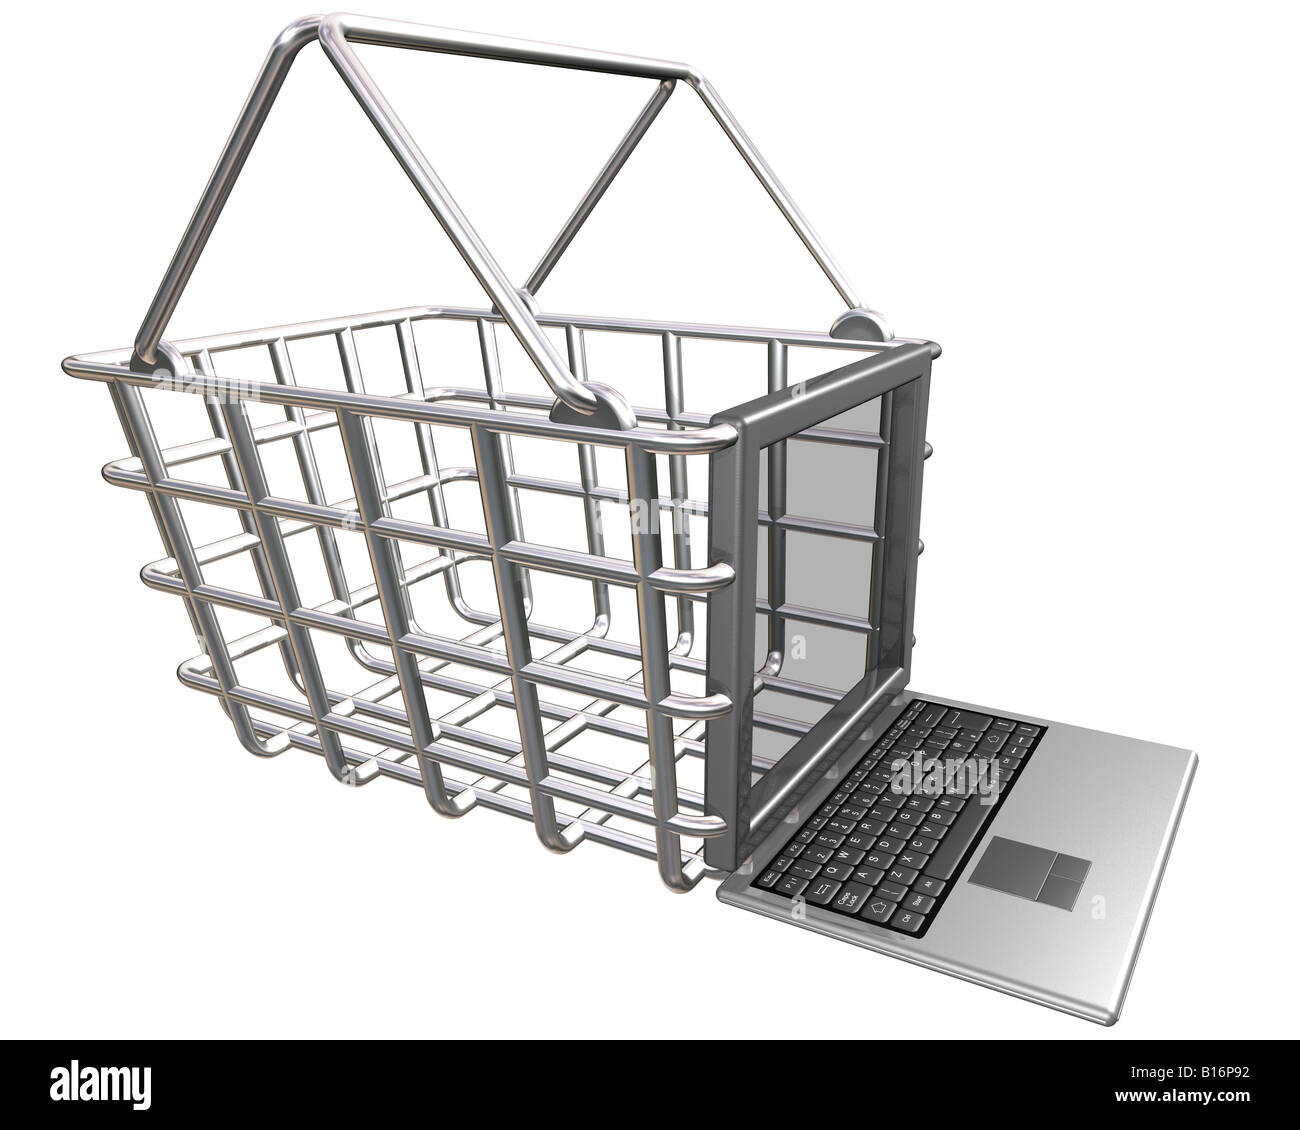 Internet shopping basket with a laptop computer looking into the basket Stock Photo